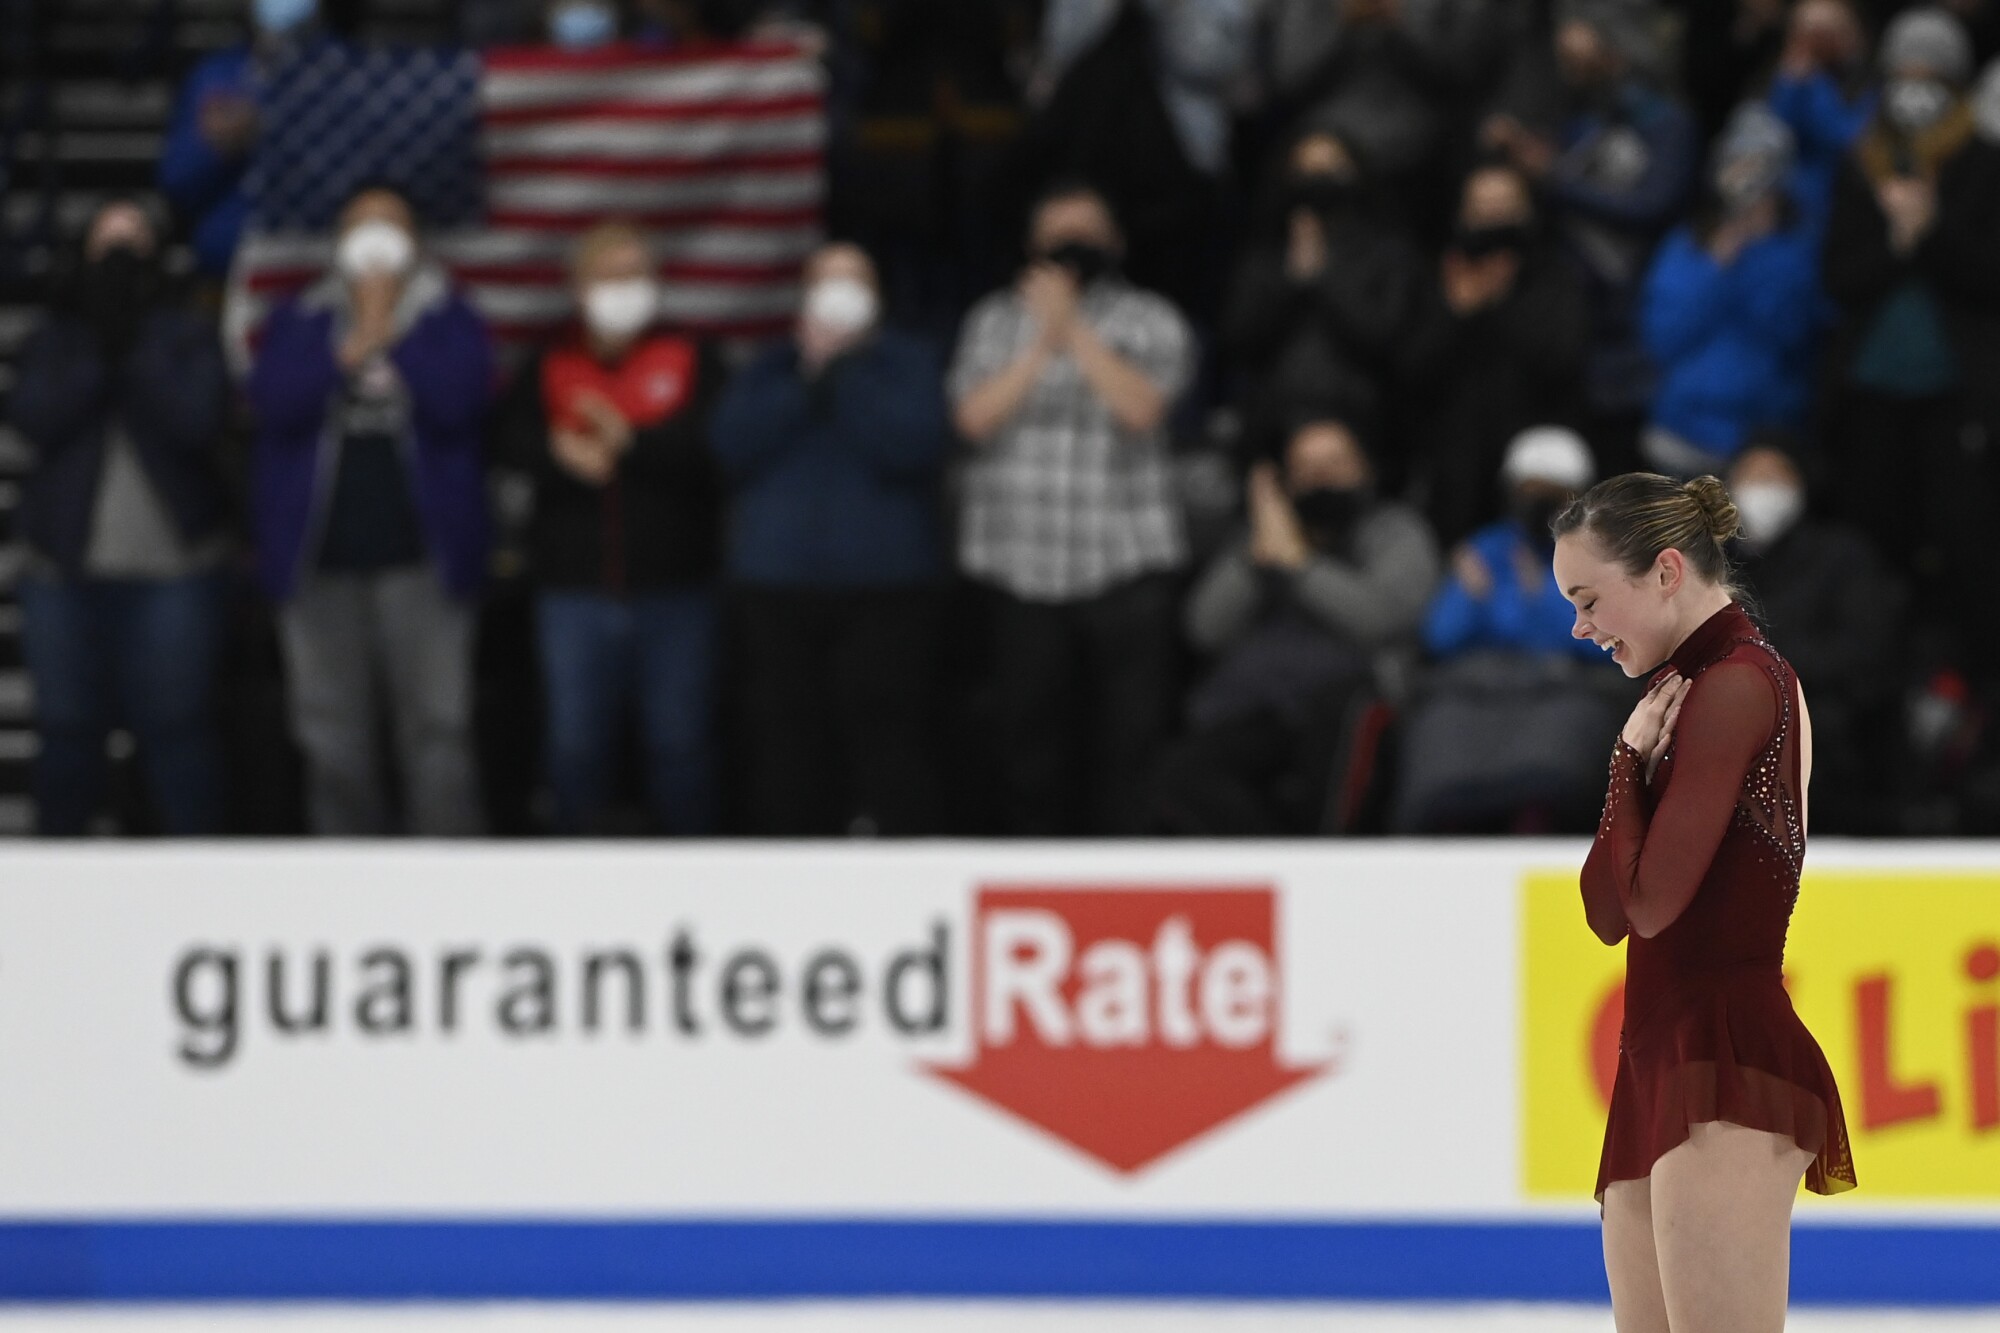 Mariah Bell gets a standing ovation from the crowd after her free skate routine at the US Figure Skating Championships.